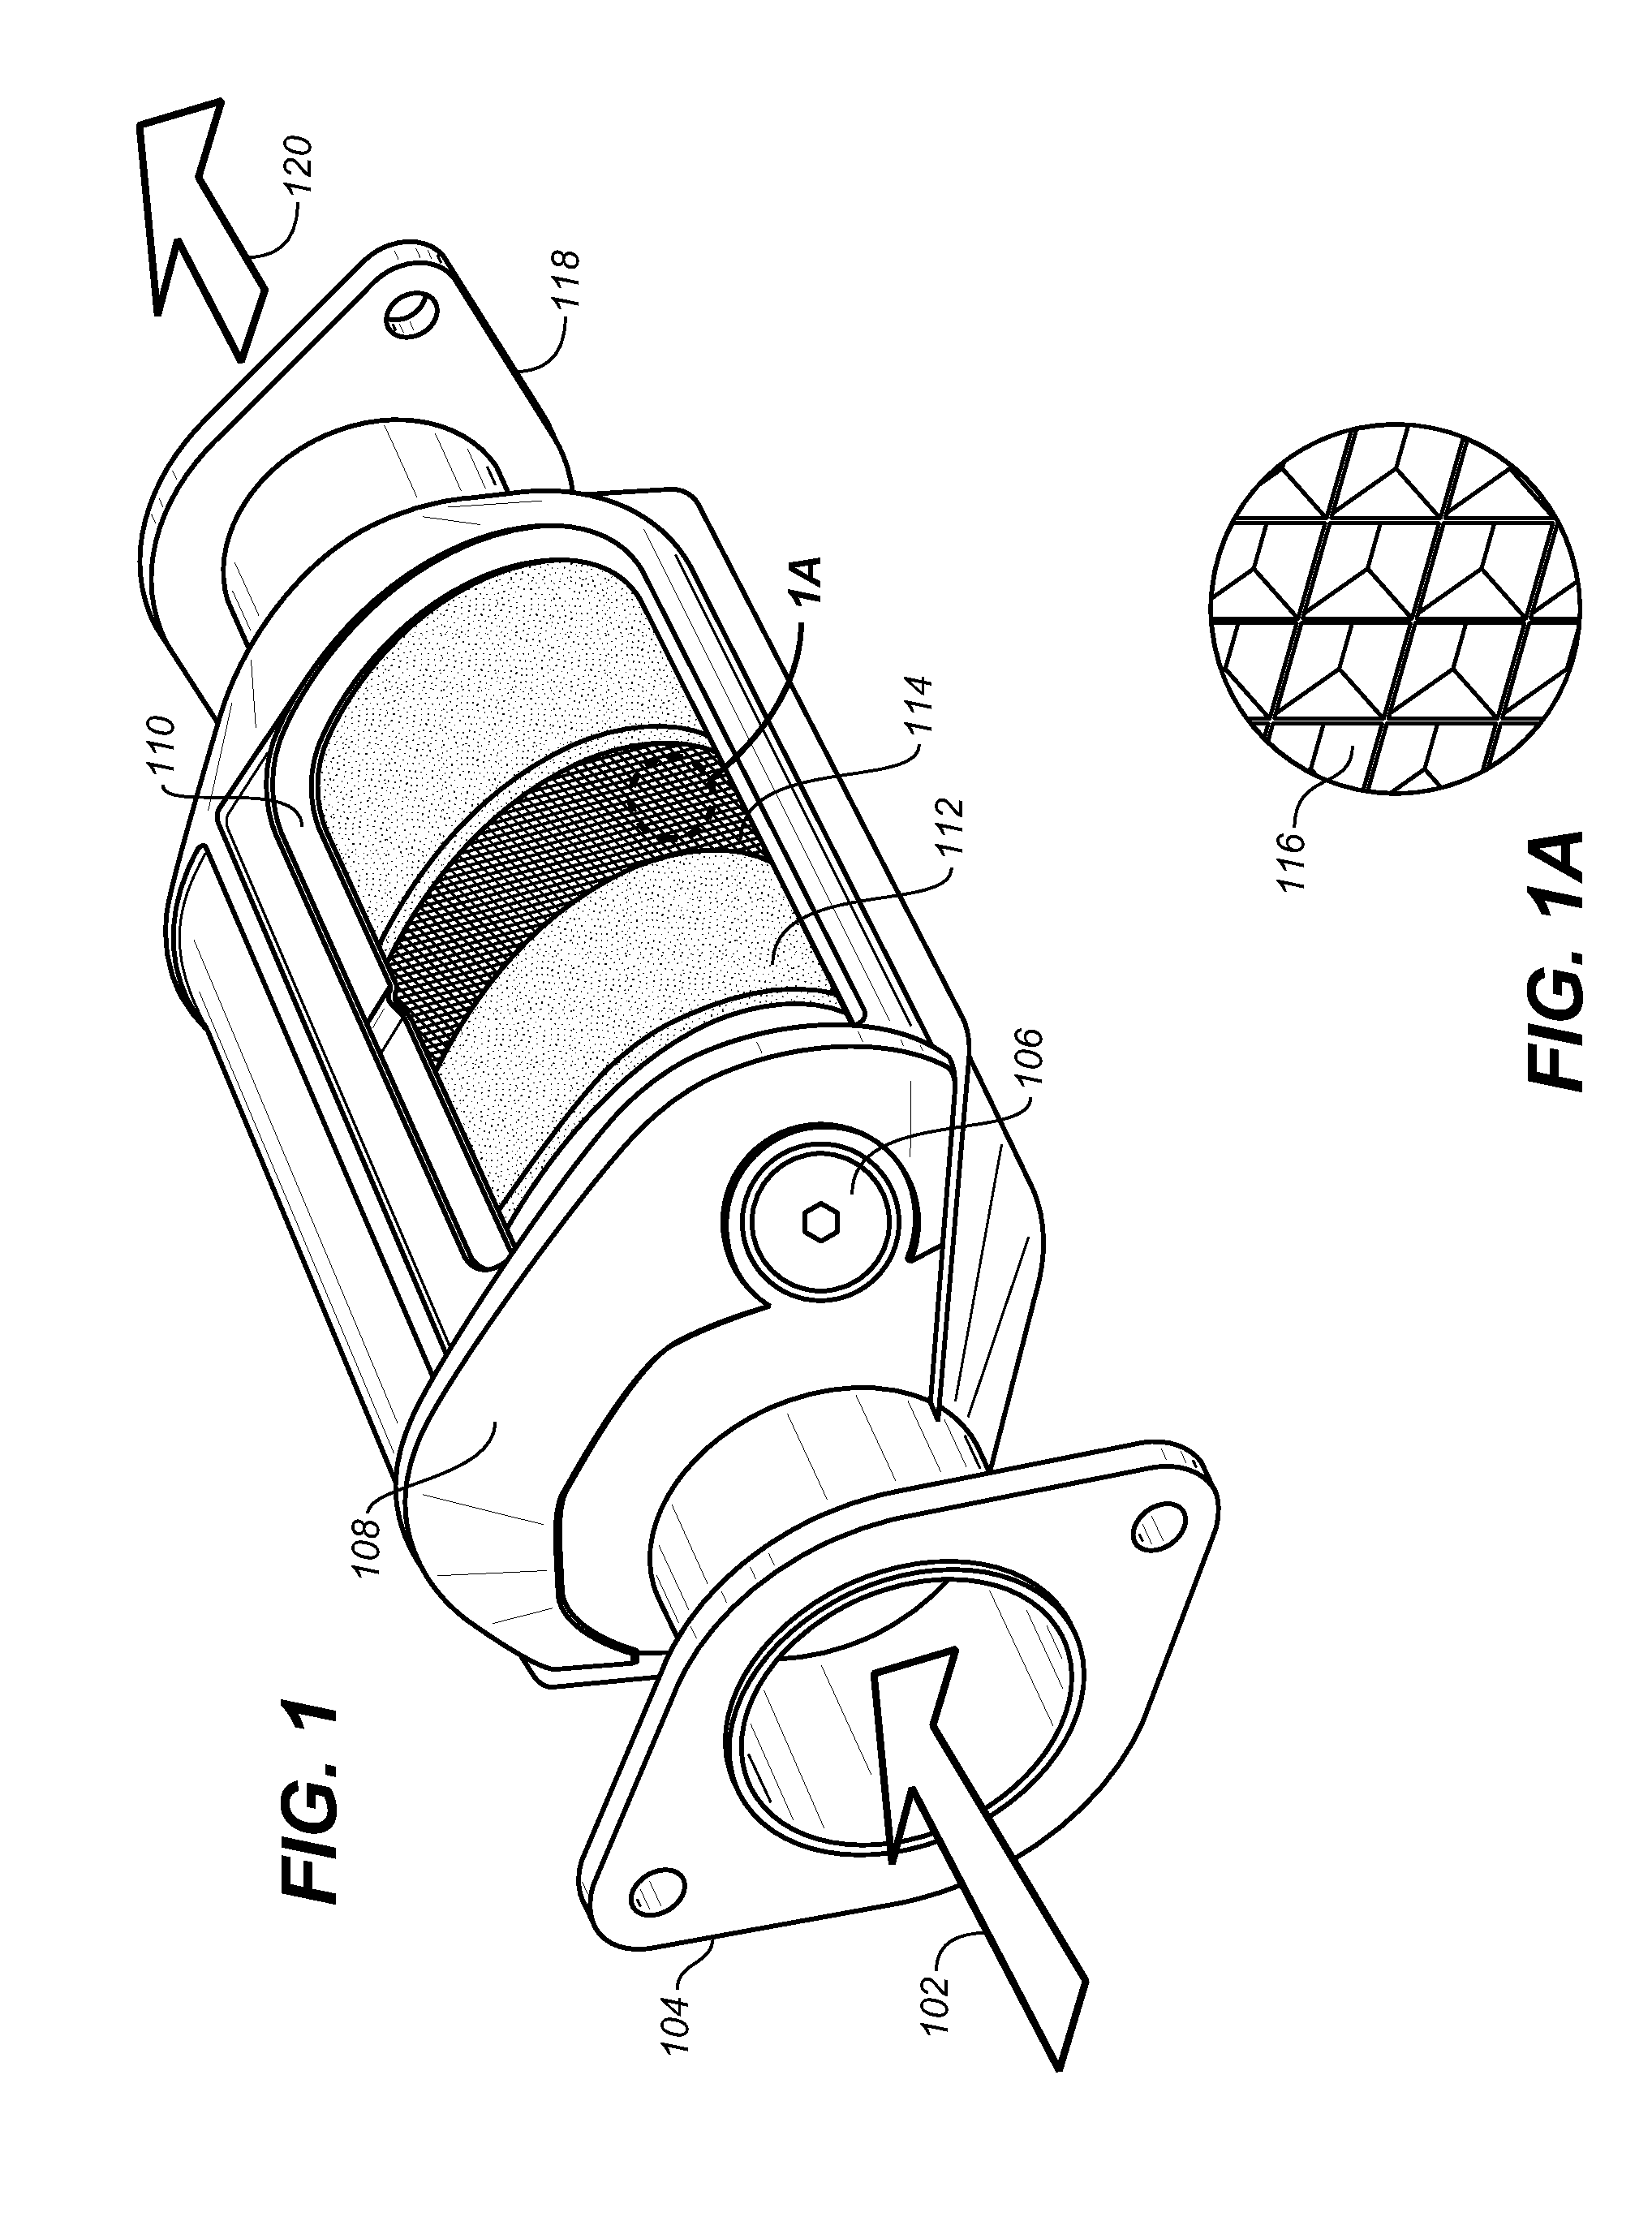 Coated substrates for use in catalysis and catalytic converters and methods of coating substrates with washcoat compositions